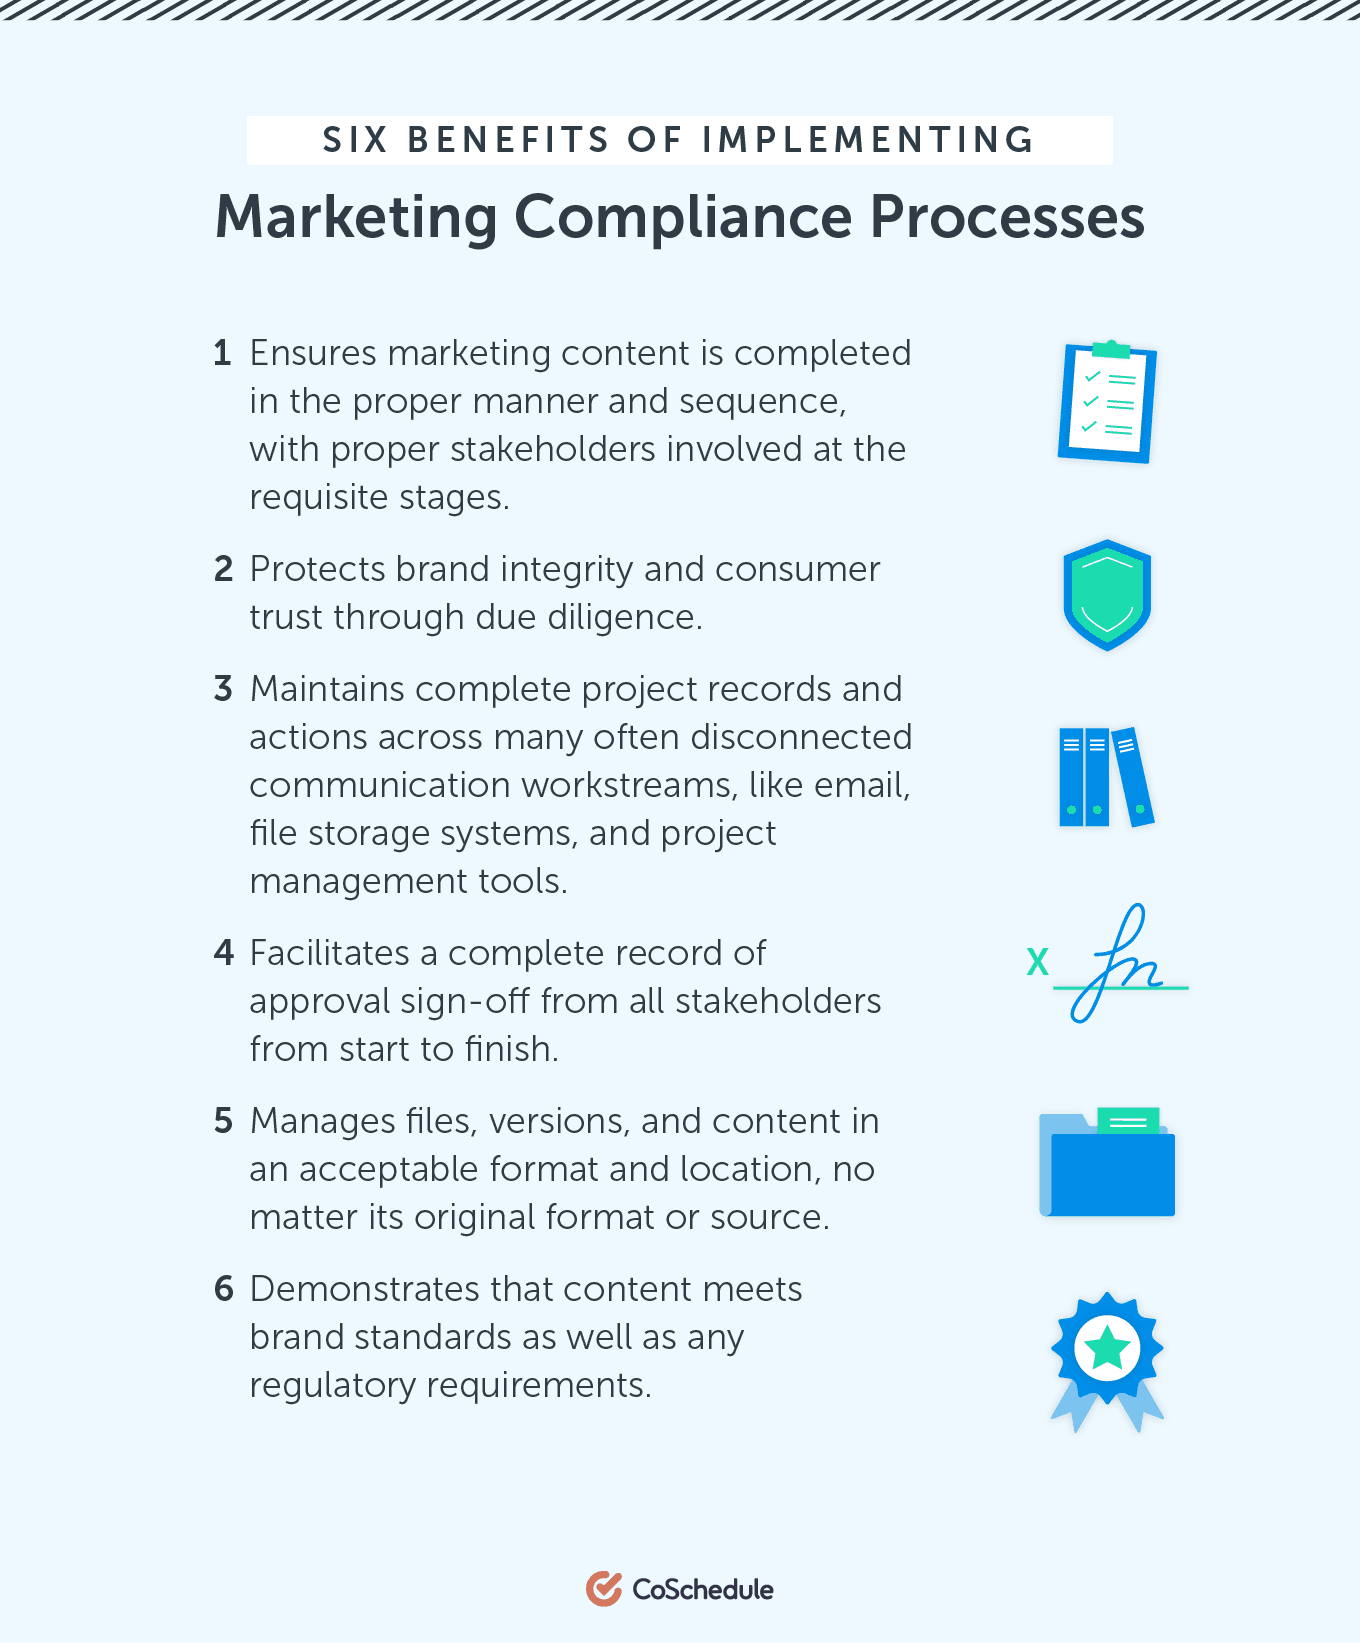 Six Benefits of Implementing Marketing Compliance Processes